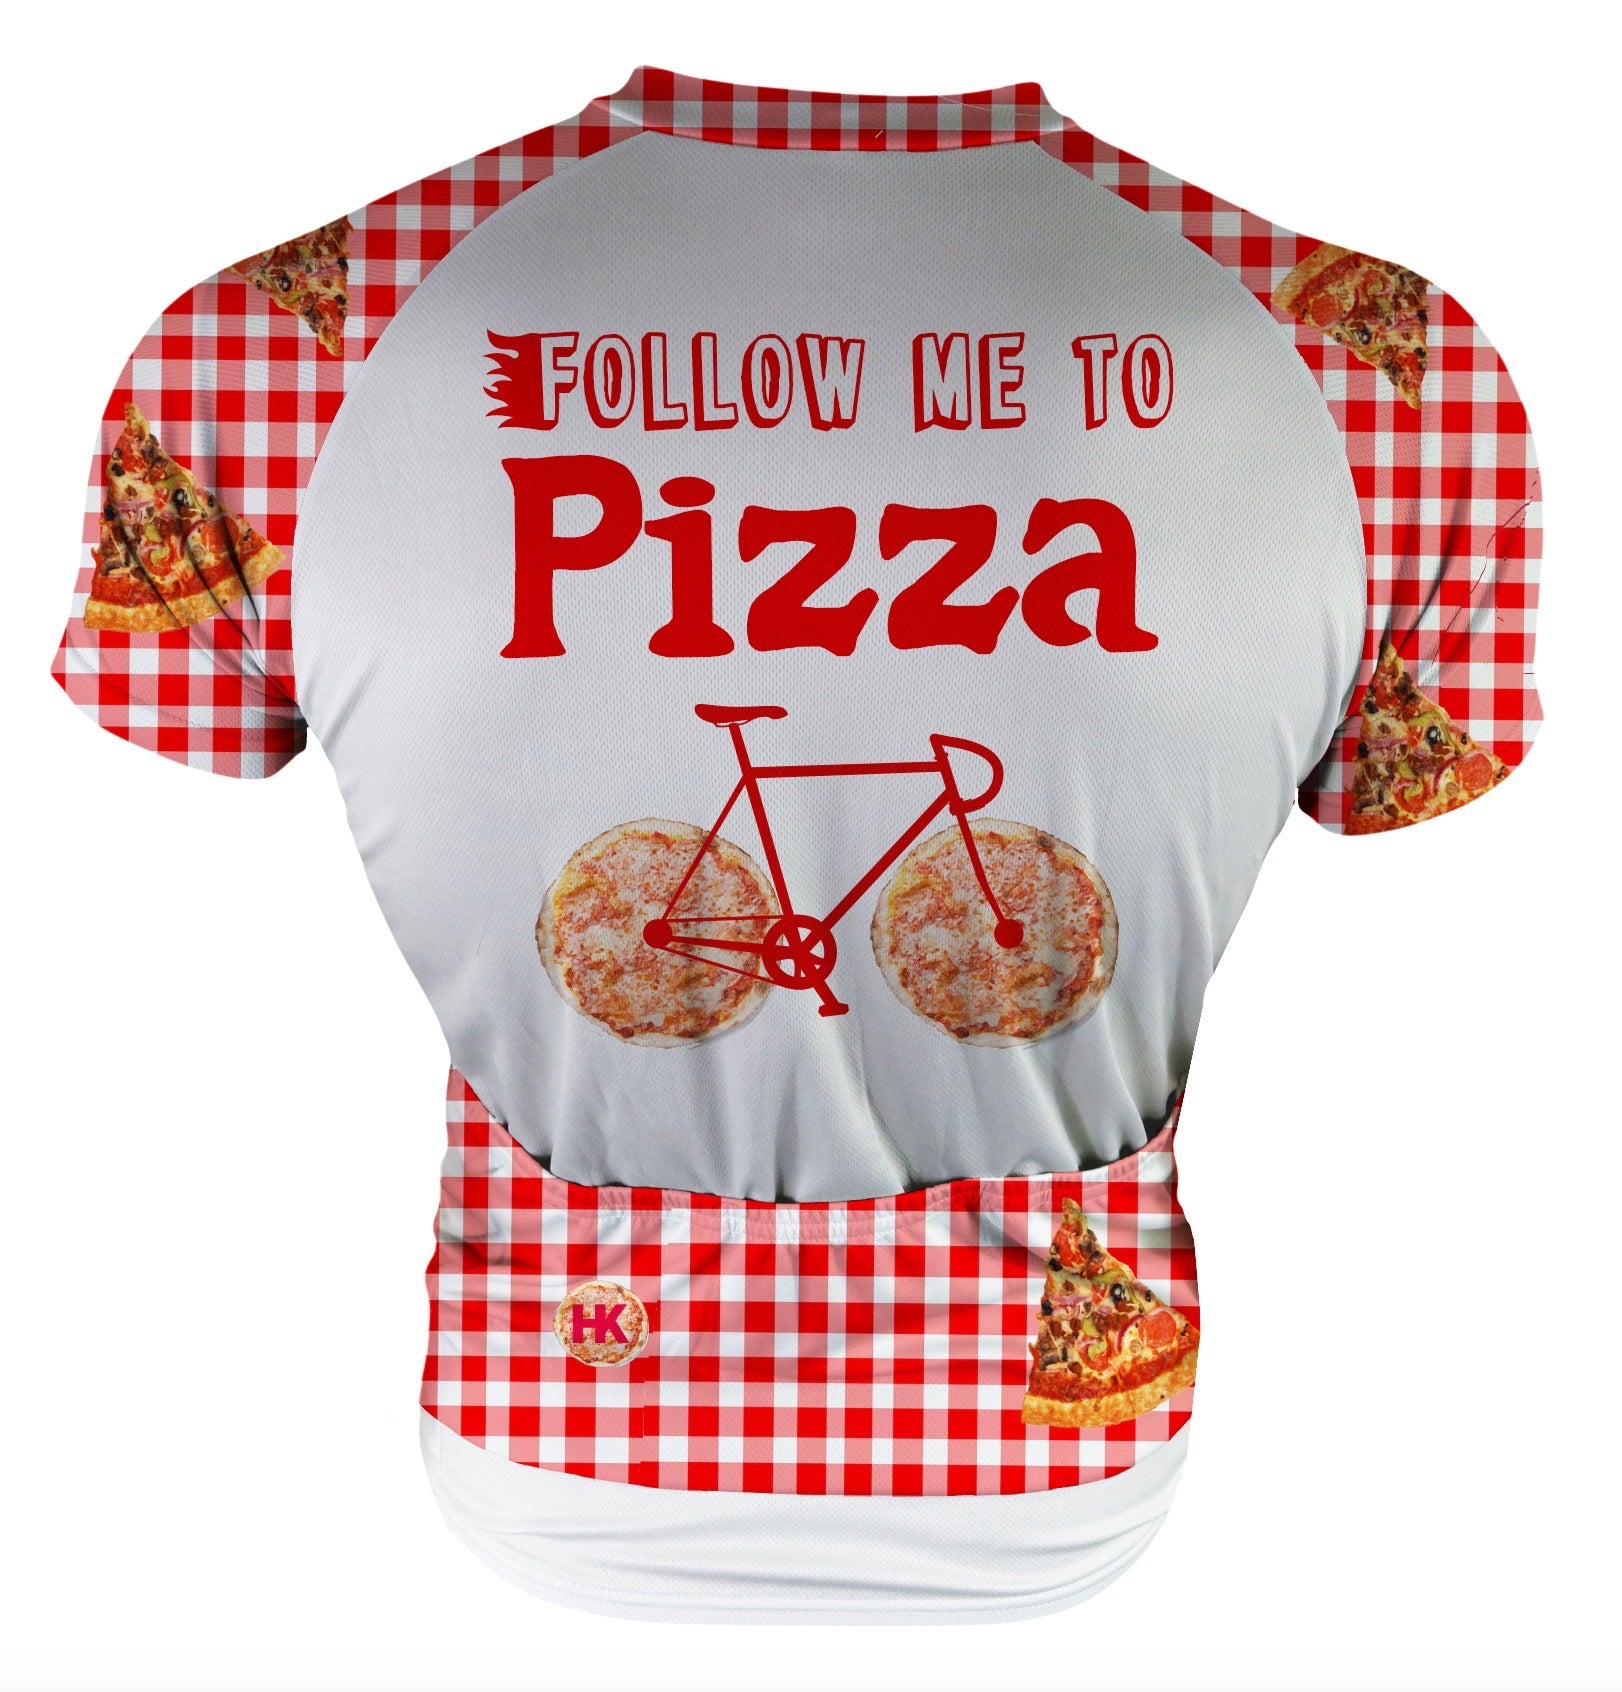 Follow me to Pizza! Men's Club-Cut Cycling Jersey by Hill Killer